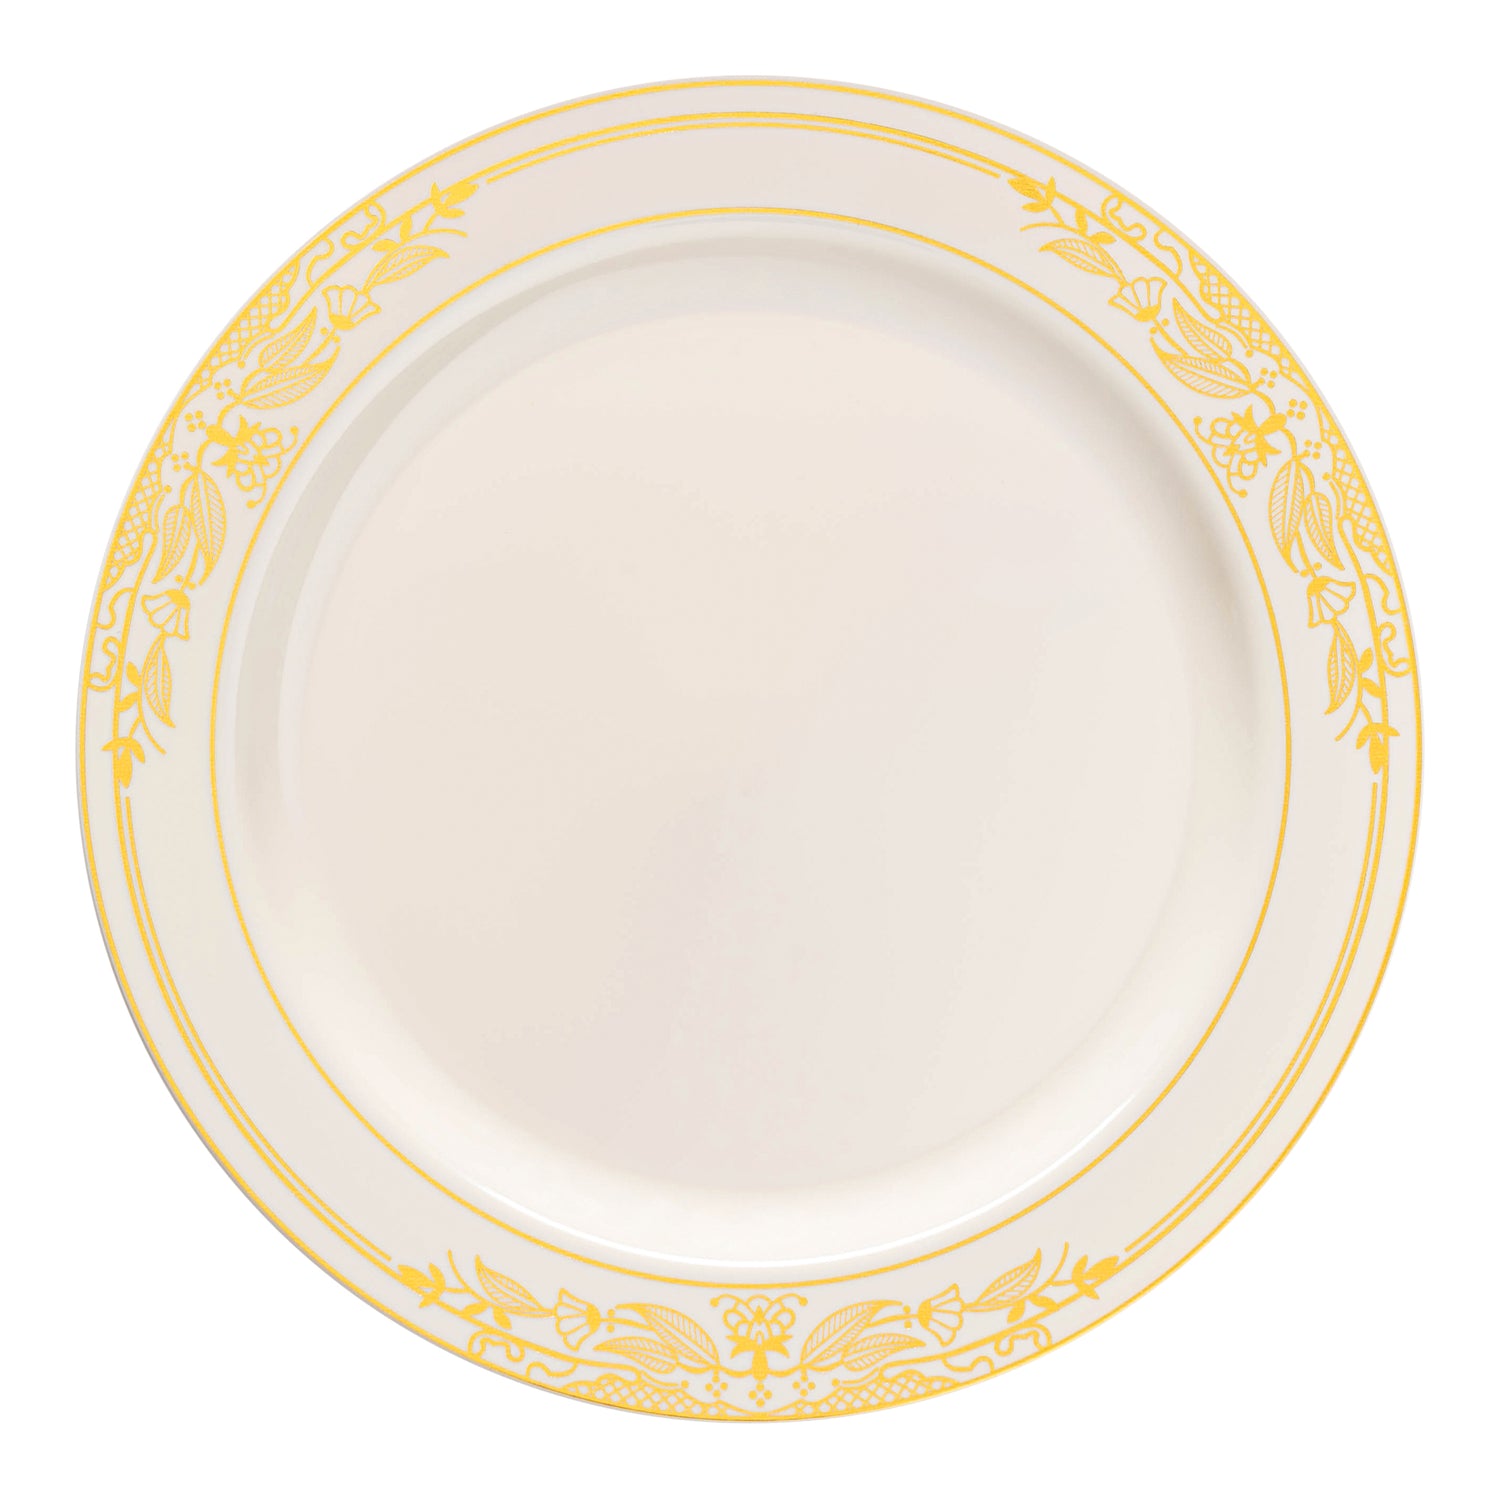 Ivory with Gold Harmony Rim Disposable Plastic Dinner Plates (10.25") | The Kaya Collection